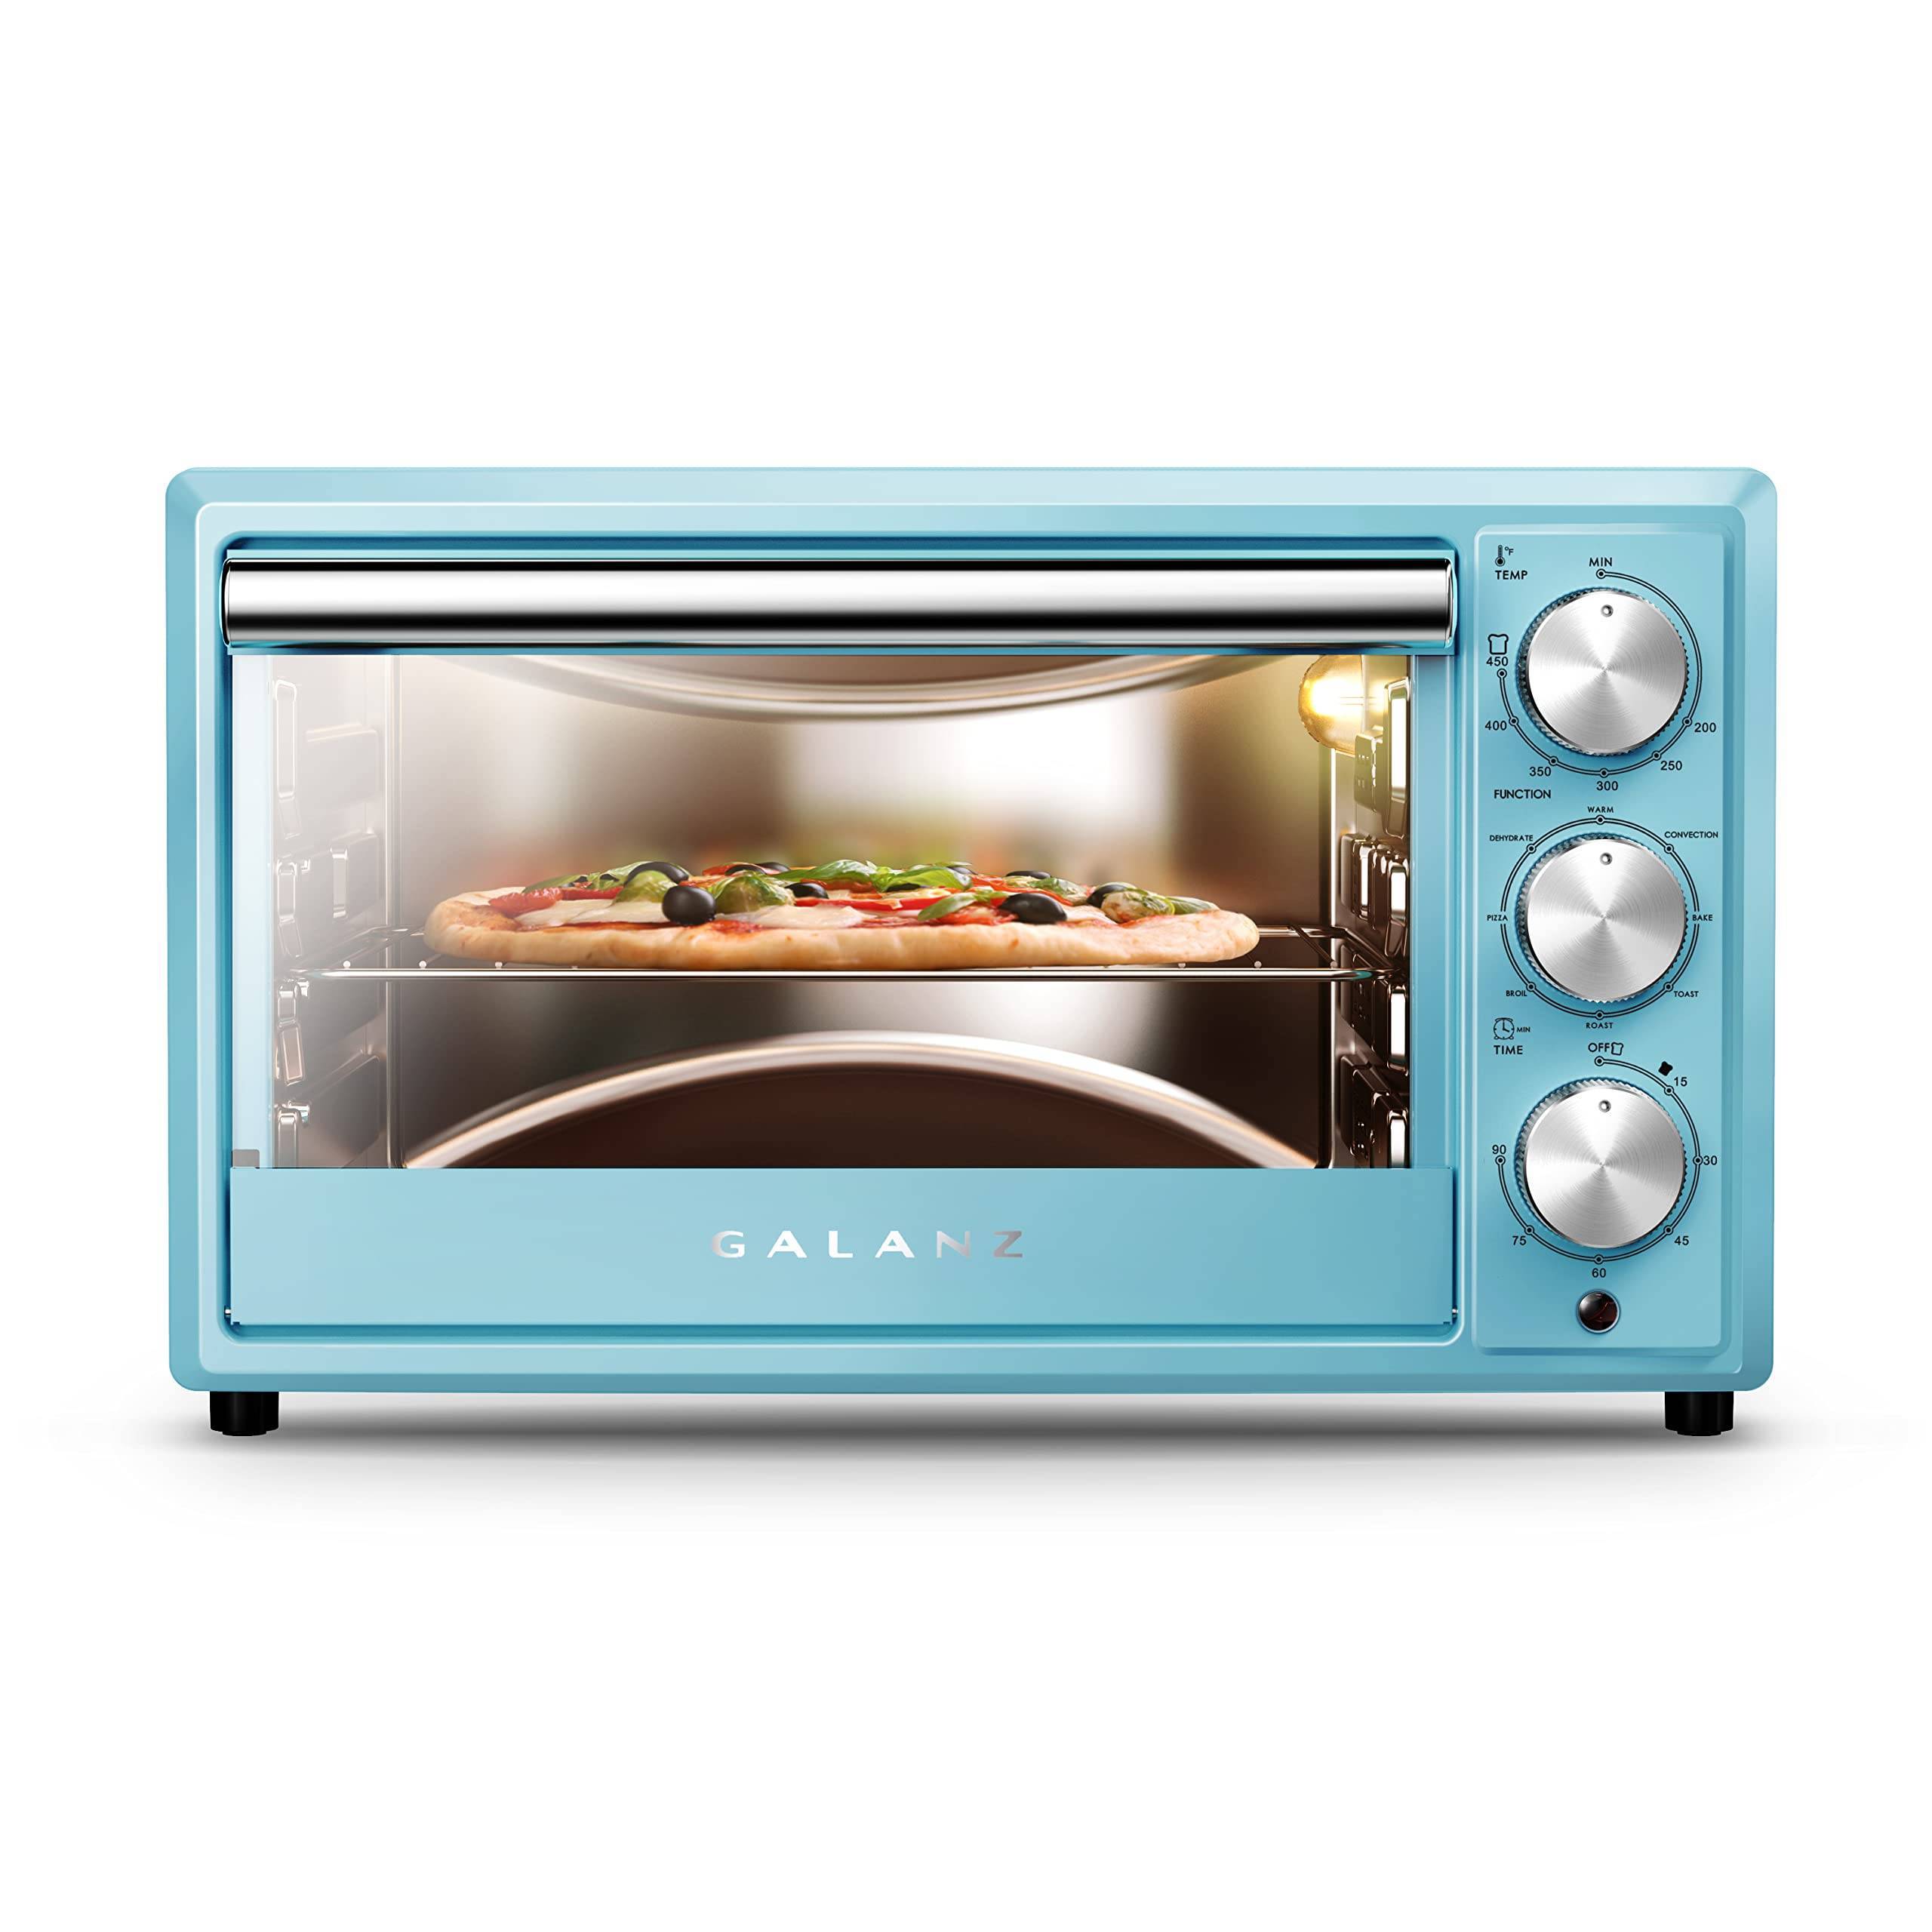 Galanz Toaster Oven